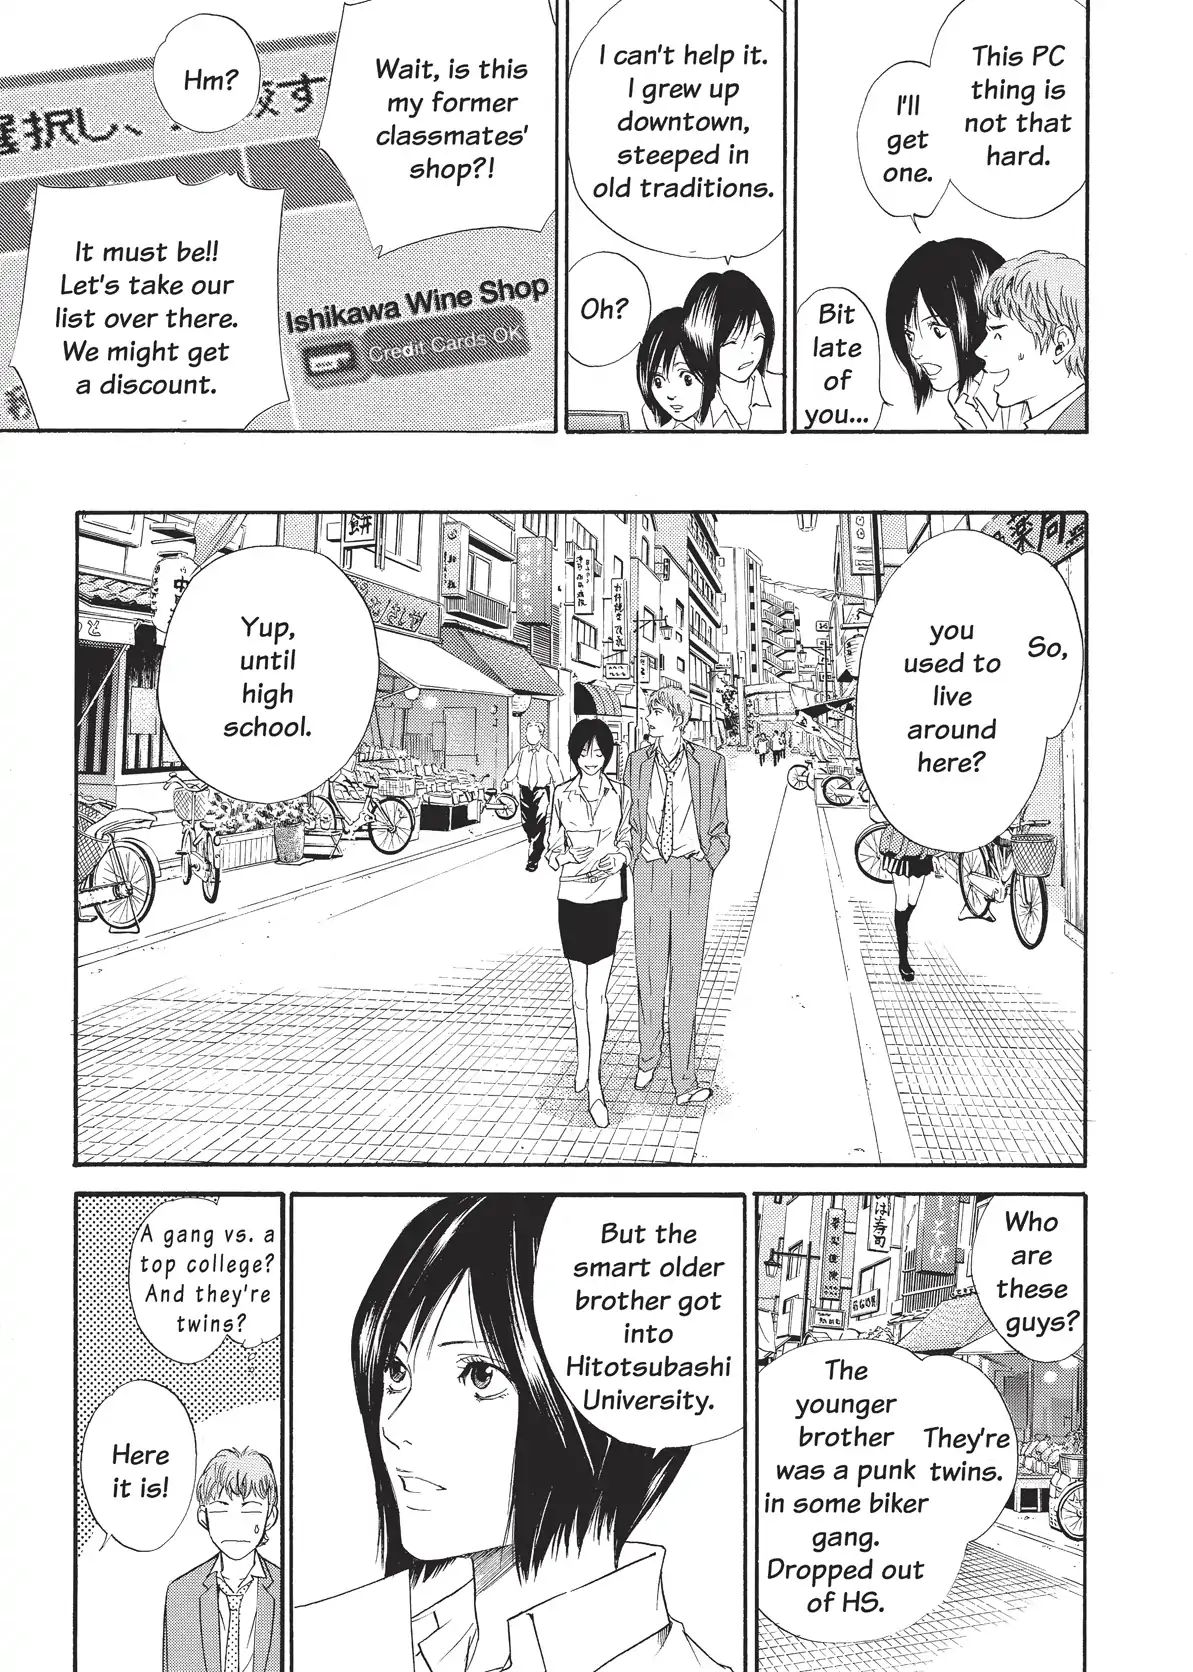 Kami No Shizuku Vol.2 Chapter 28: Downtown Wine Brothers Blues - Picture 3